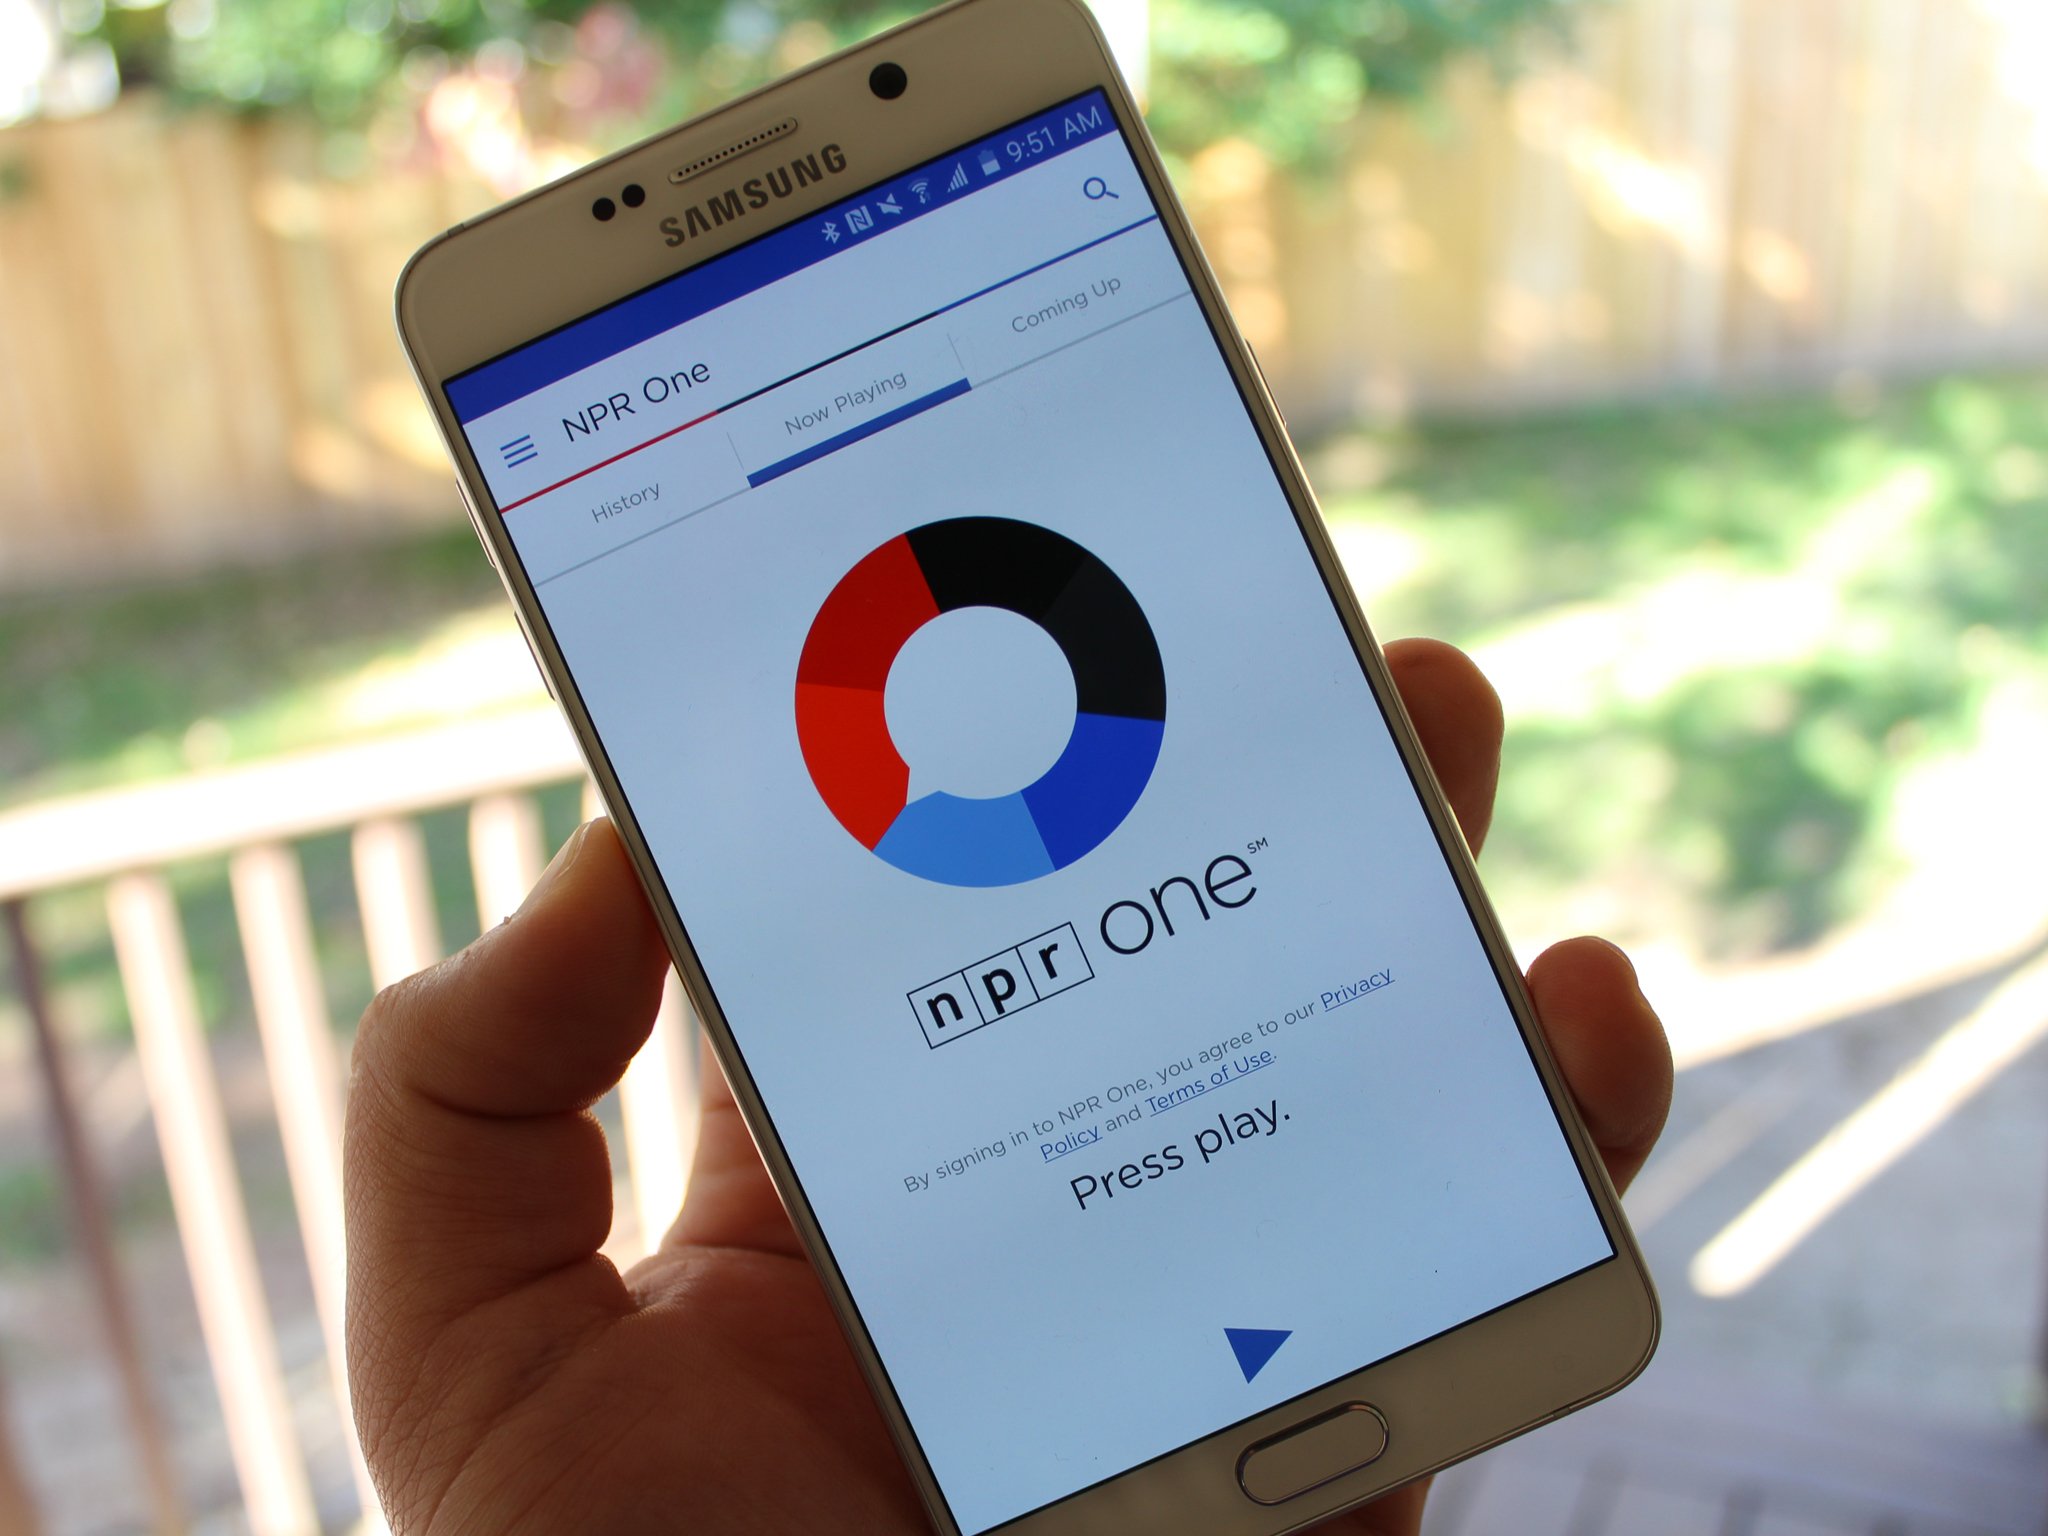 NPR One for Android gains